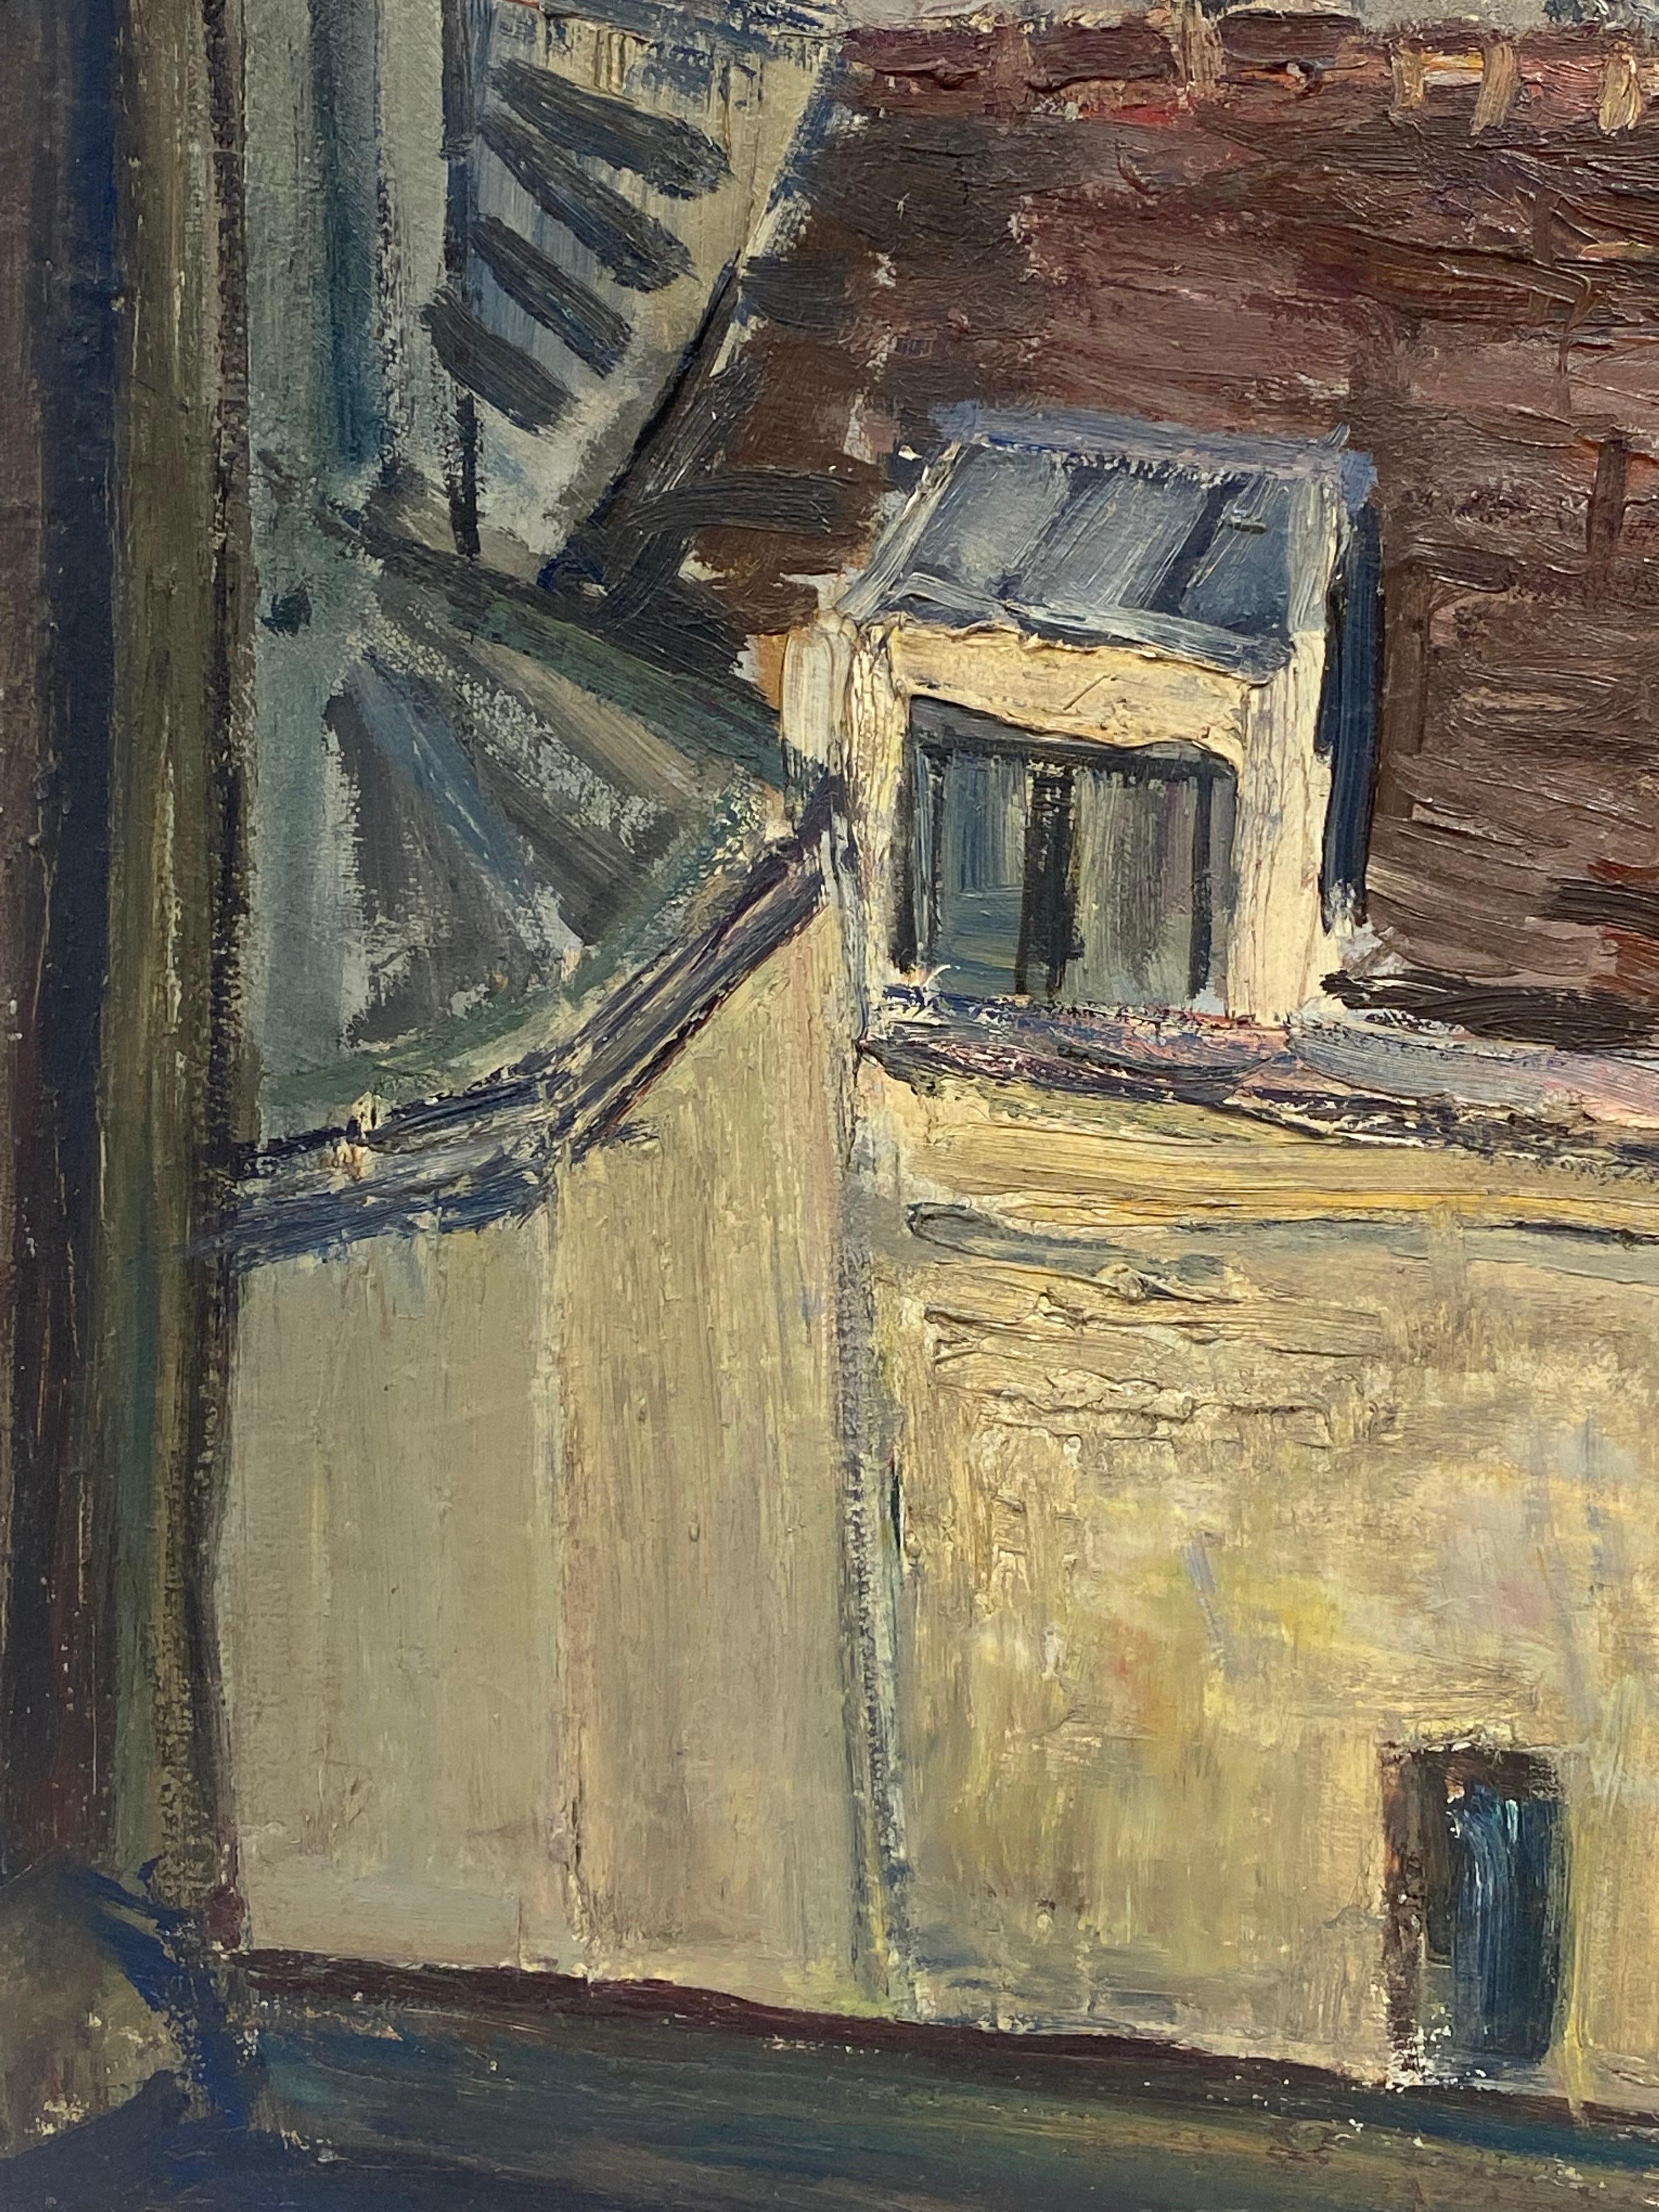 Rue Jacob Paris Rooftops 1950 Superb Original French Post-Impressionist Oil  - Gray Landscape Painting by Édouard Righetti (1924-2001)